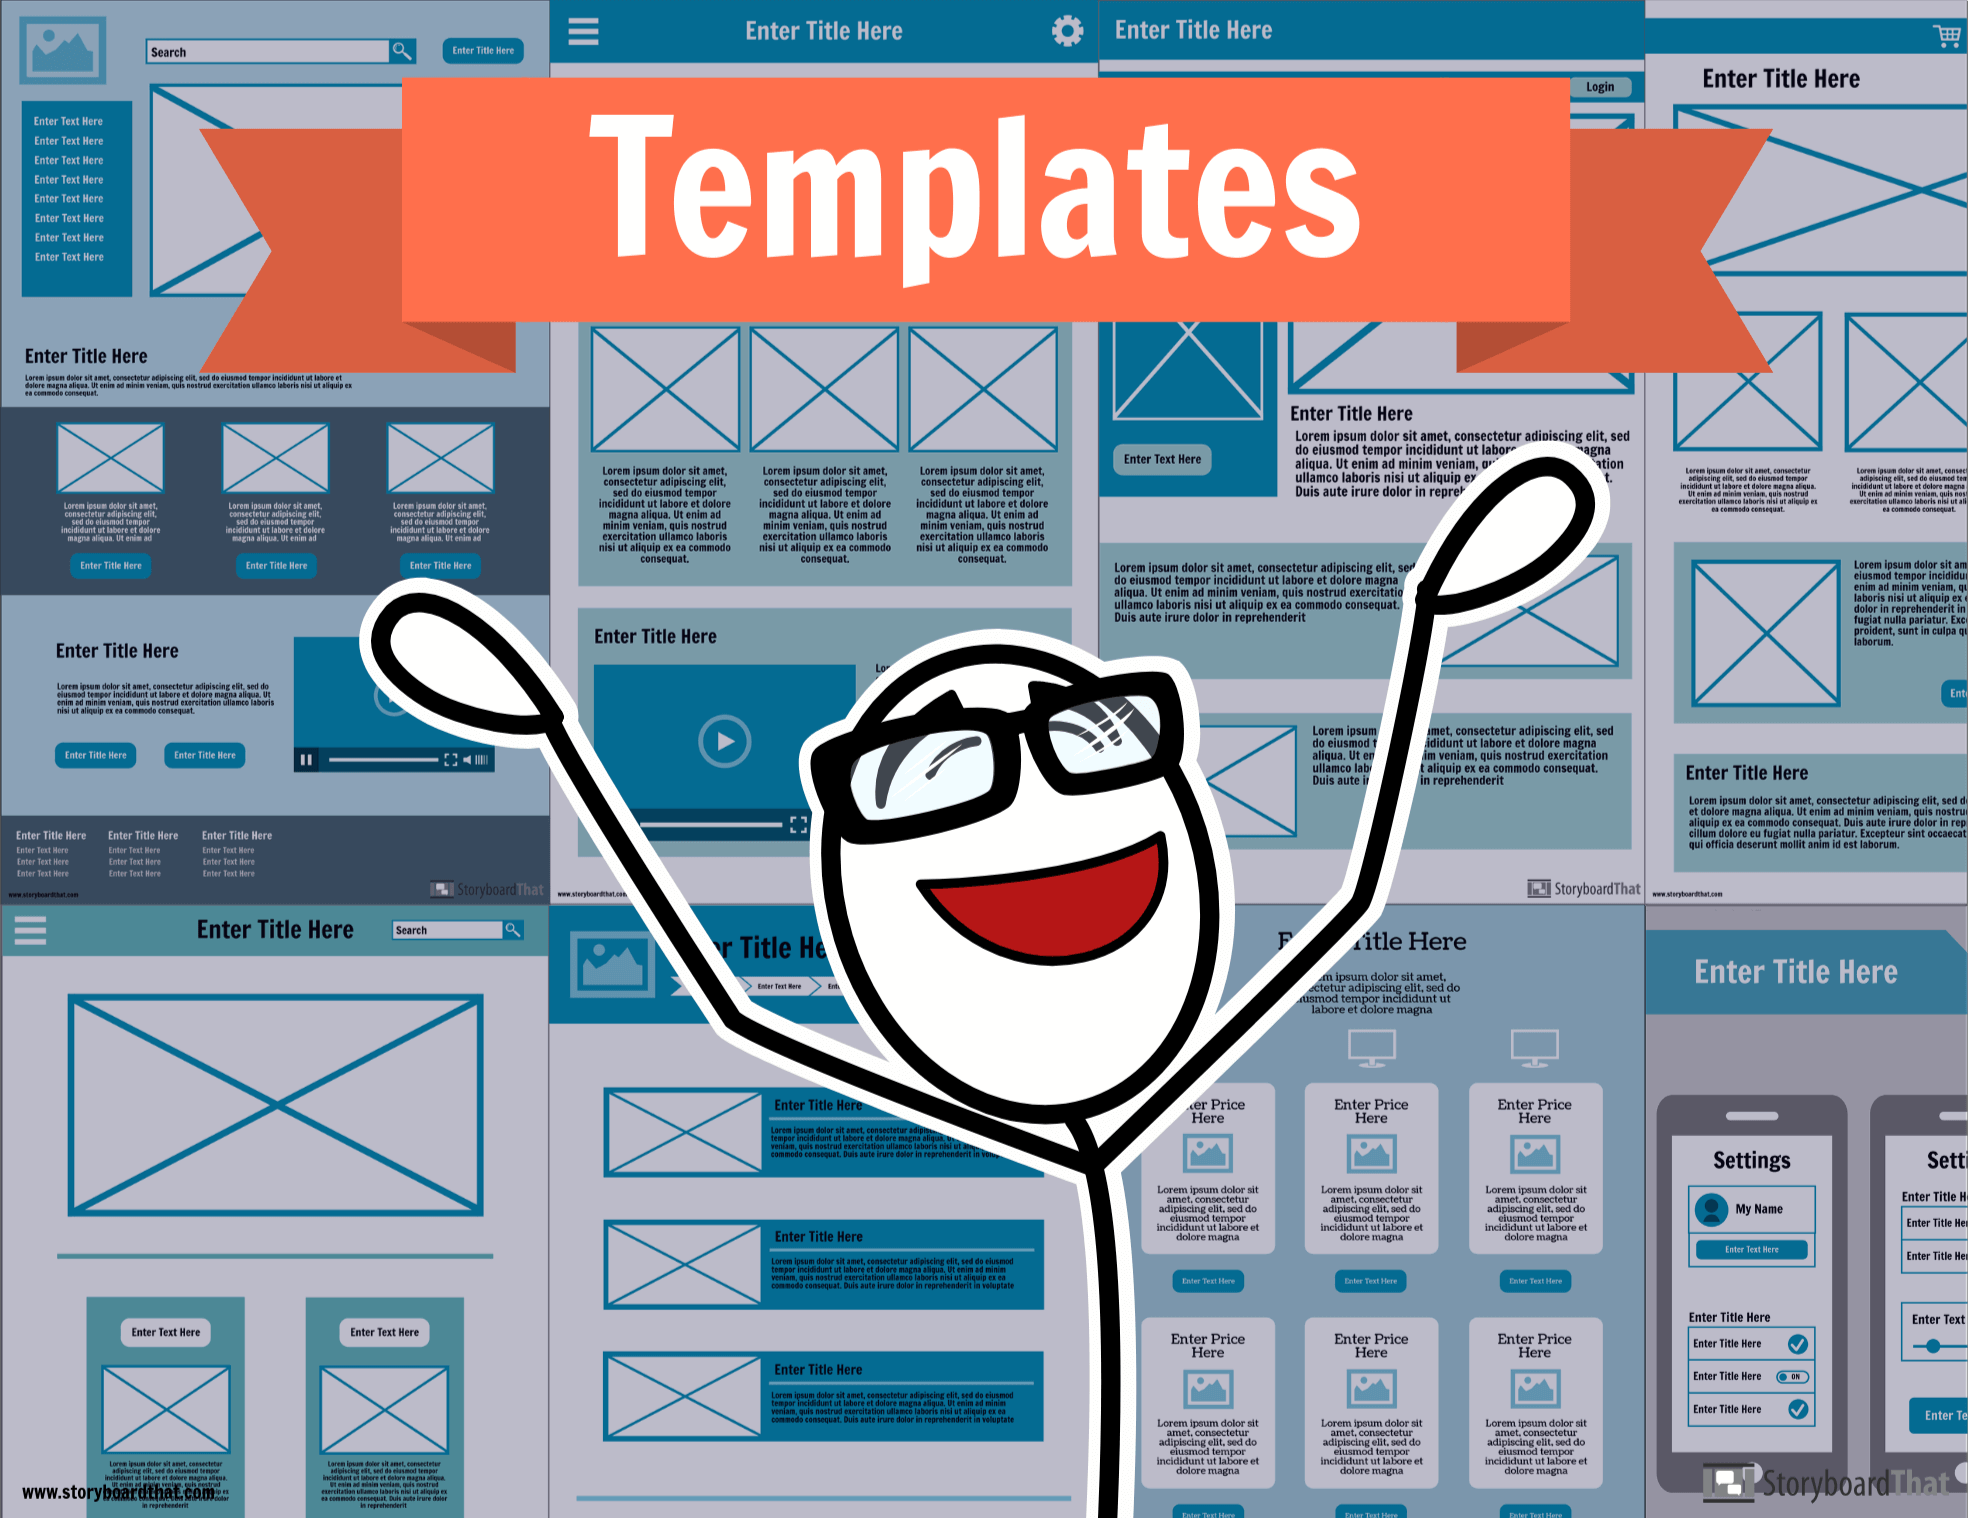 Wireframes are great for your next project